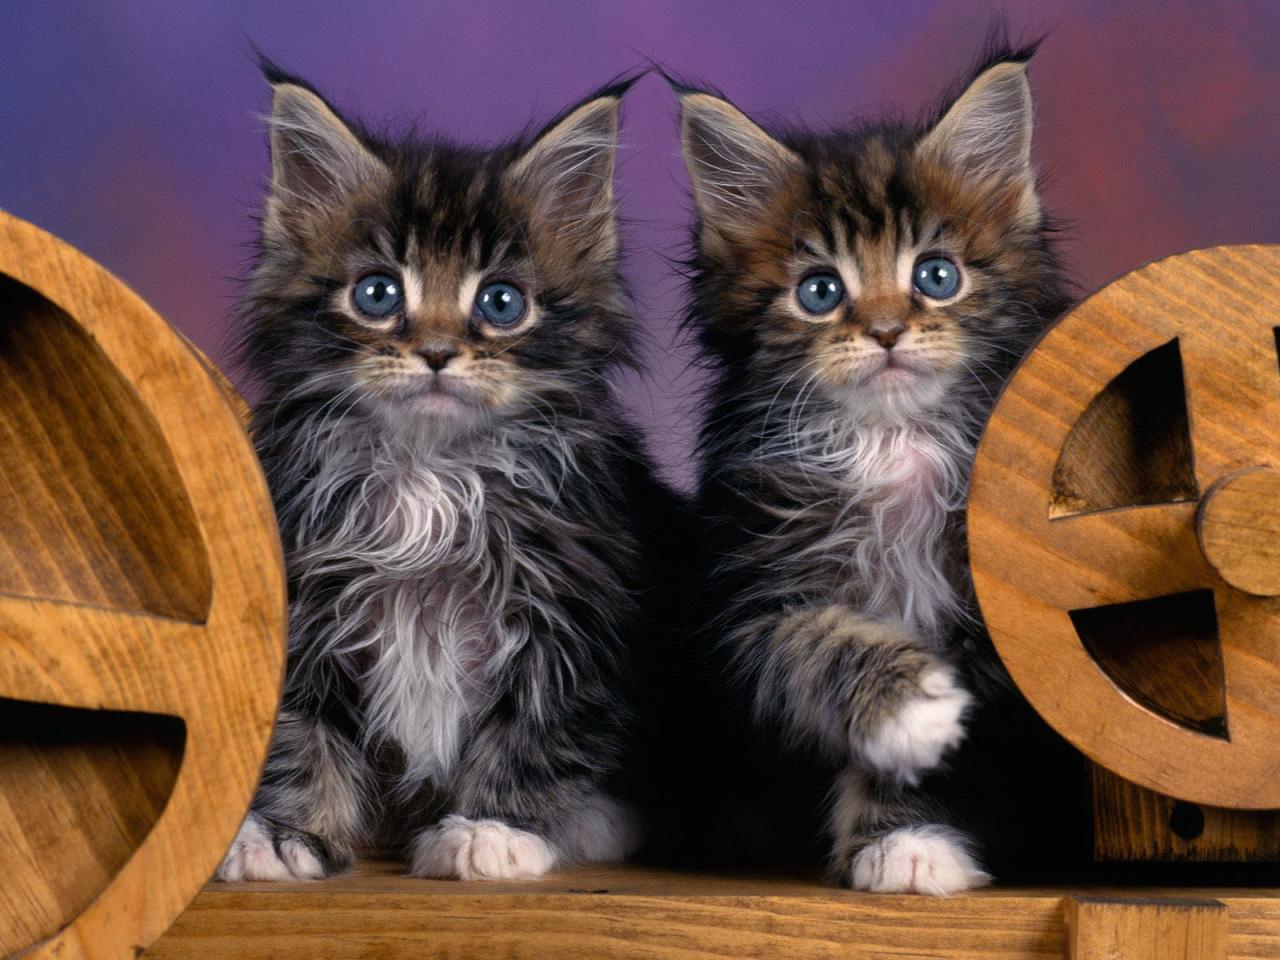 Mccormick maine coon kittens